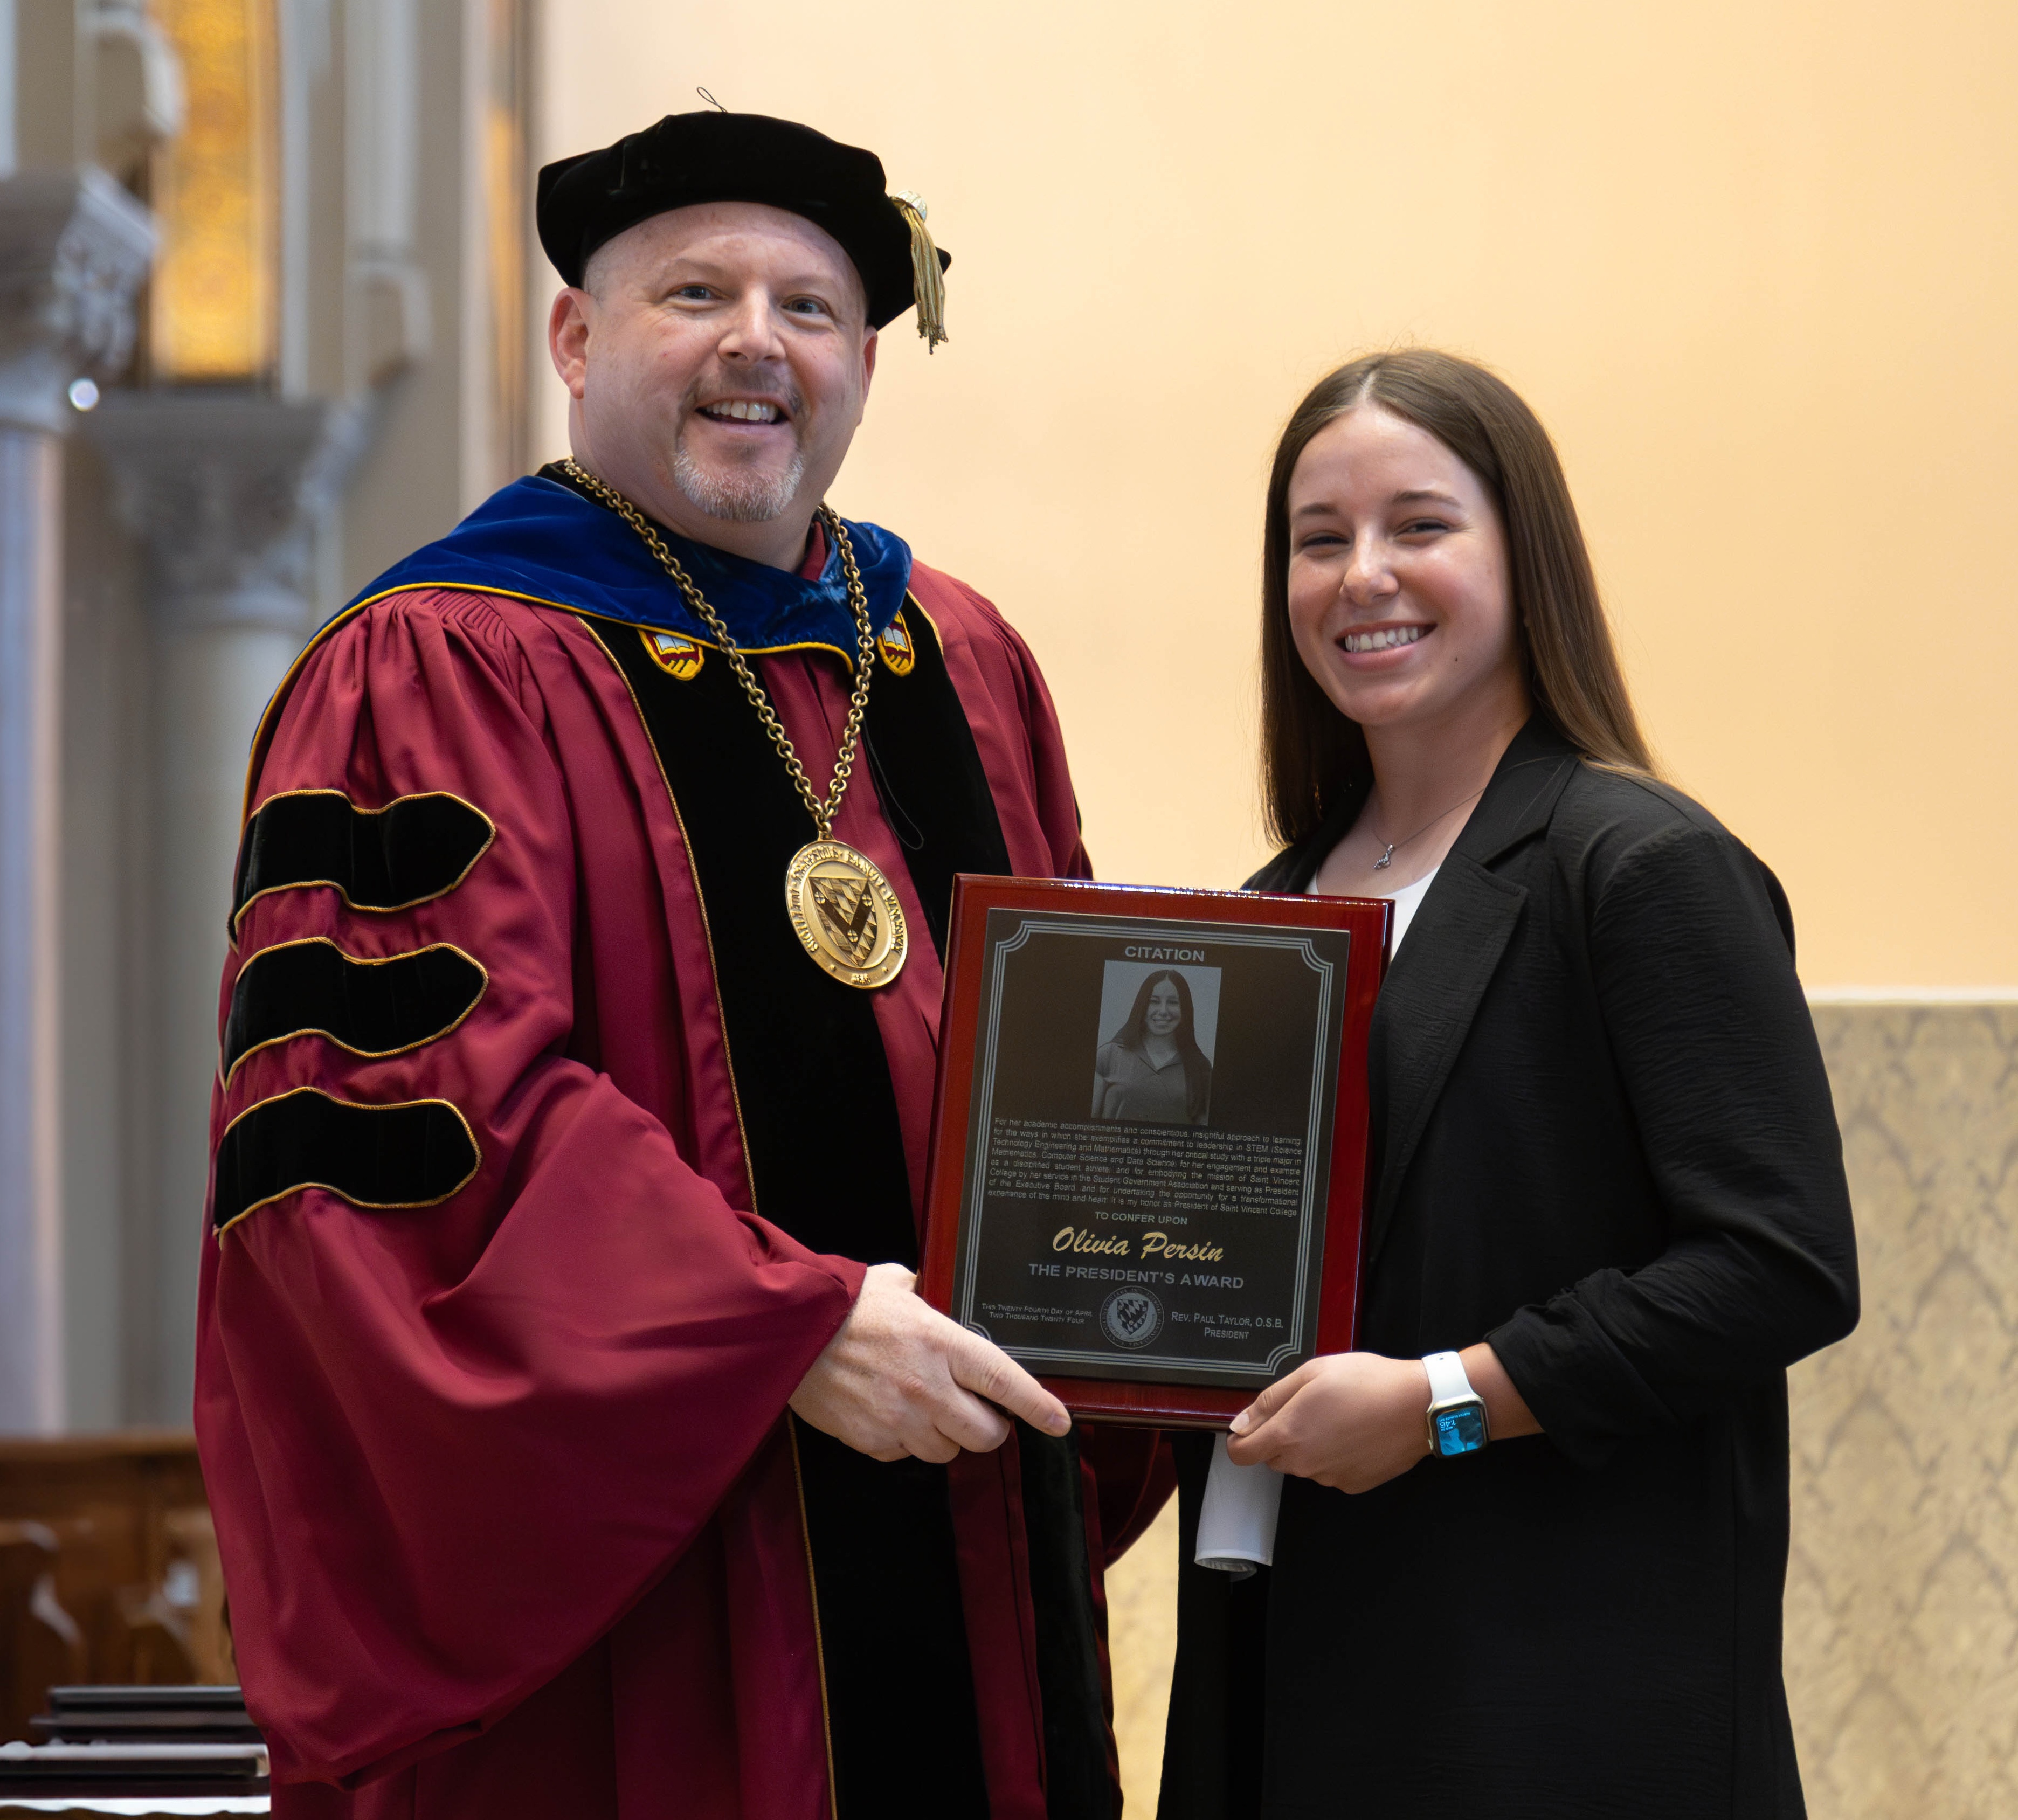 Olivia Persin and Fr. Paul Taylor, O.S.B., president of Saint Vincent